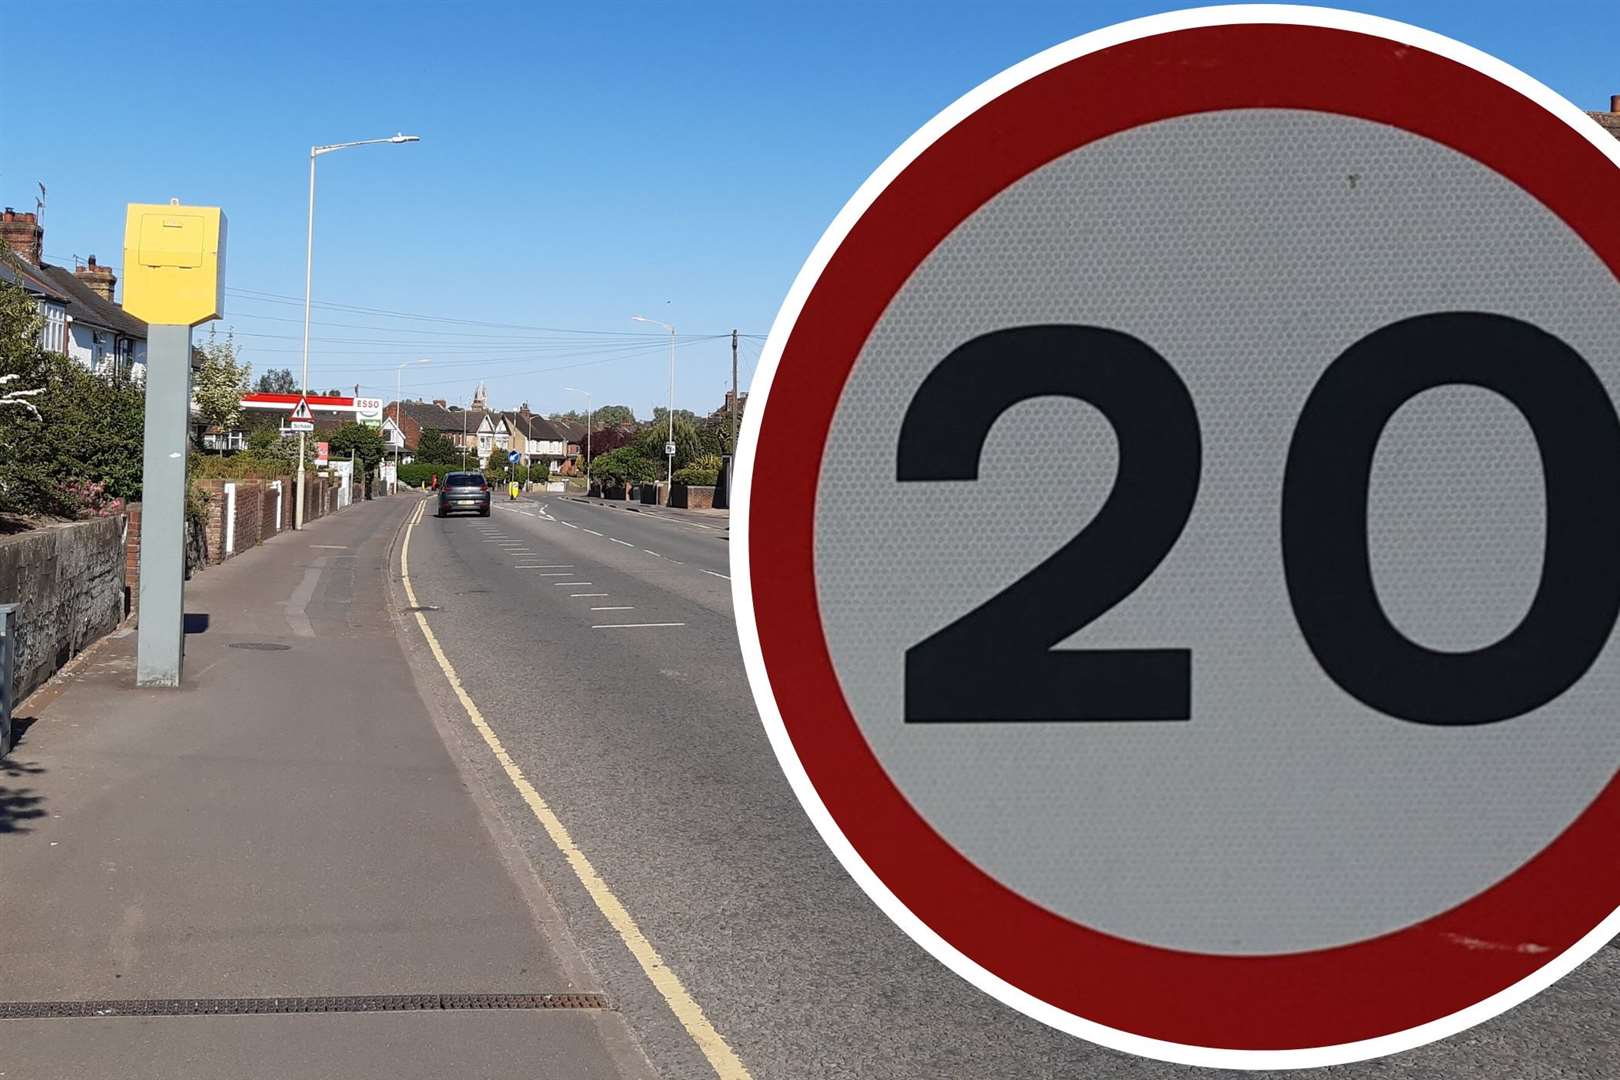 It seems people don't like the 20mph limits